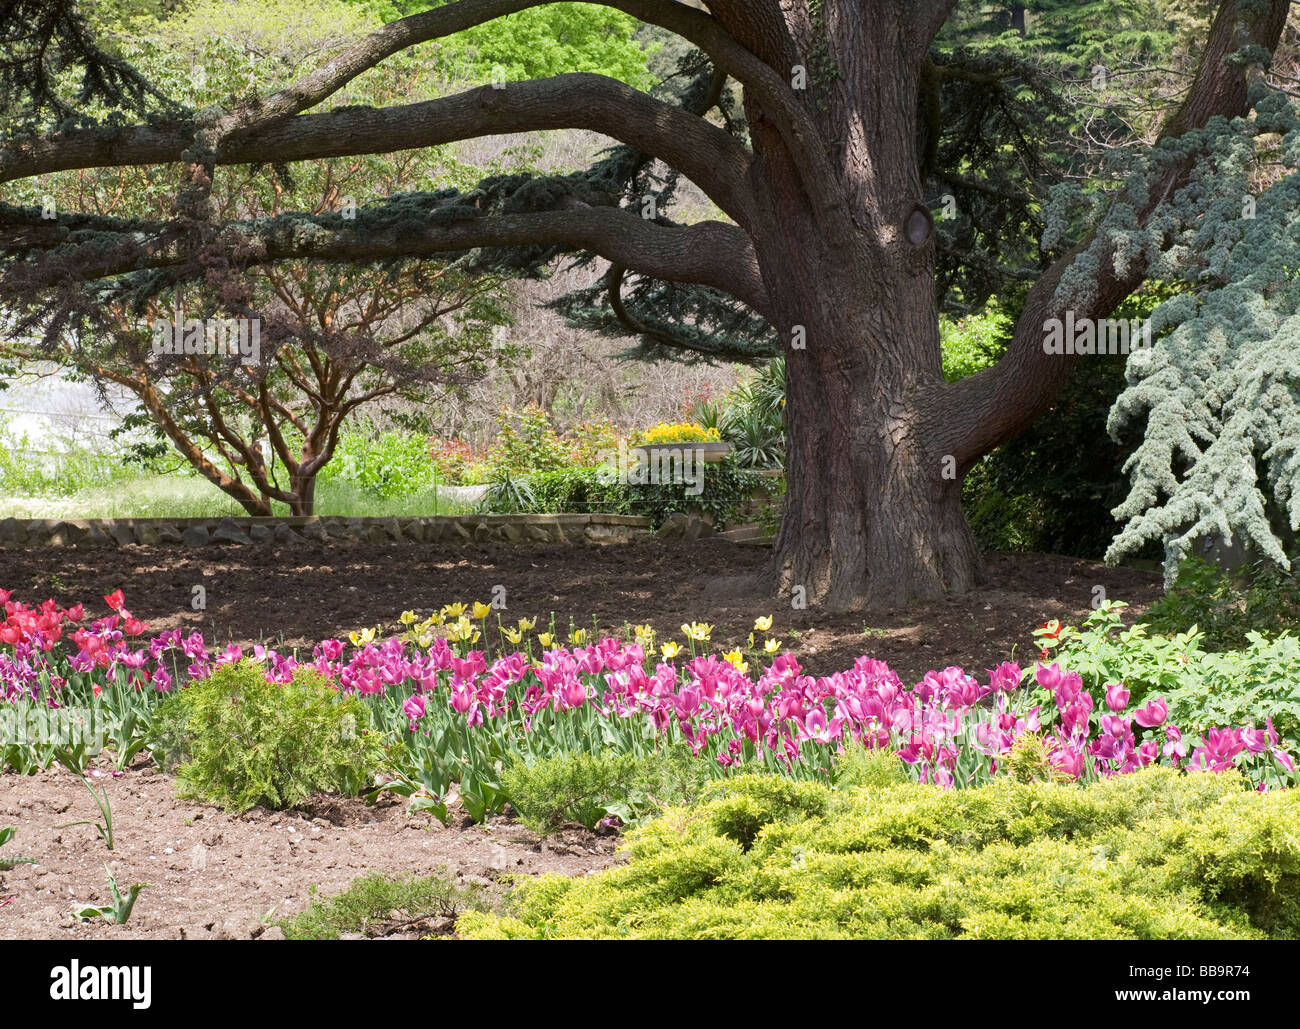 basal trunk part of old majestic conifer tree and tulips Stock Photo